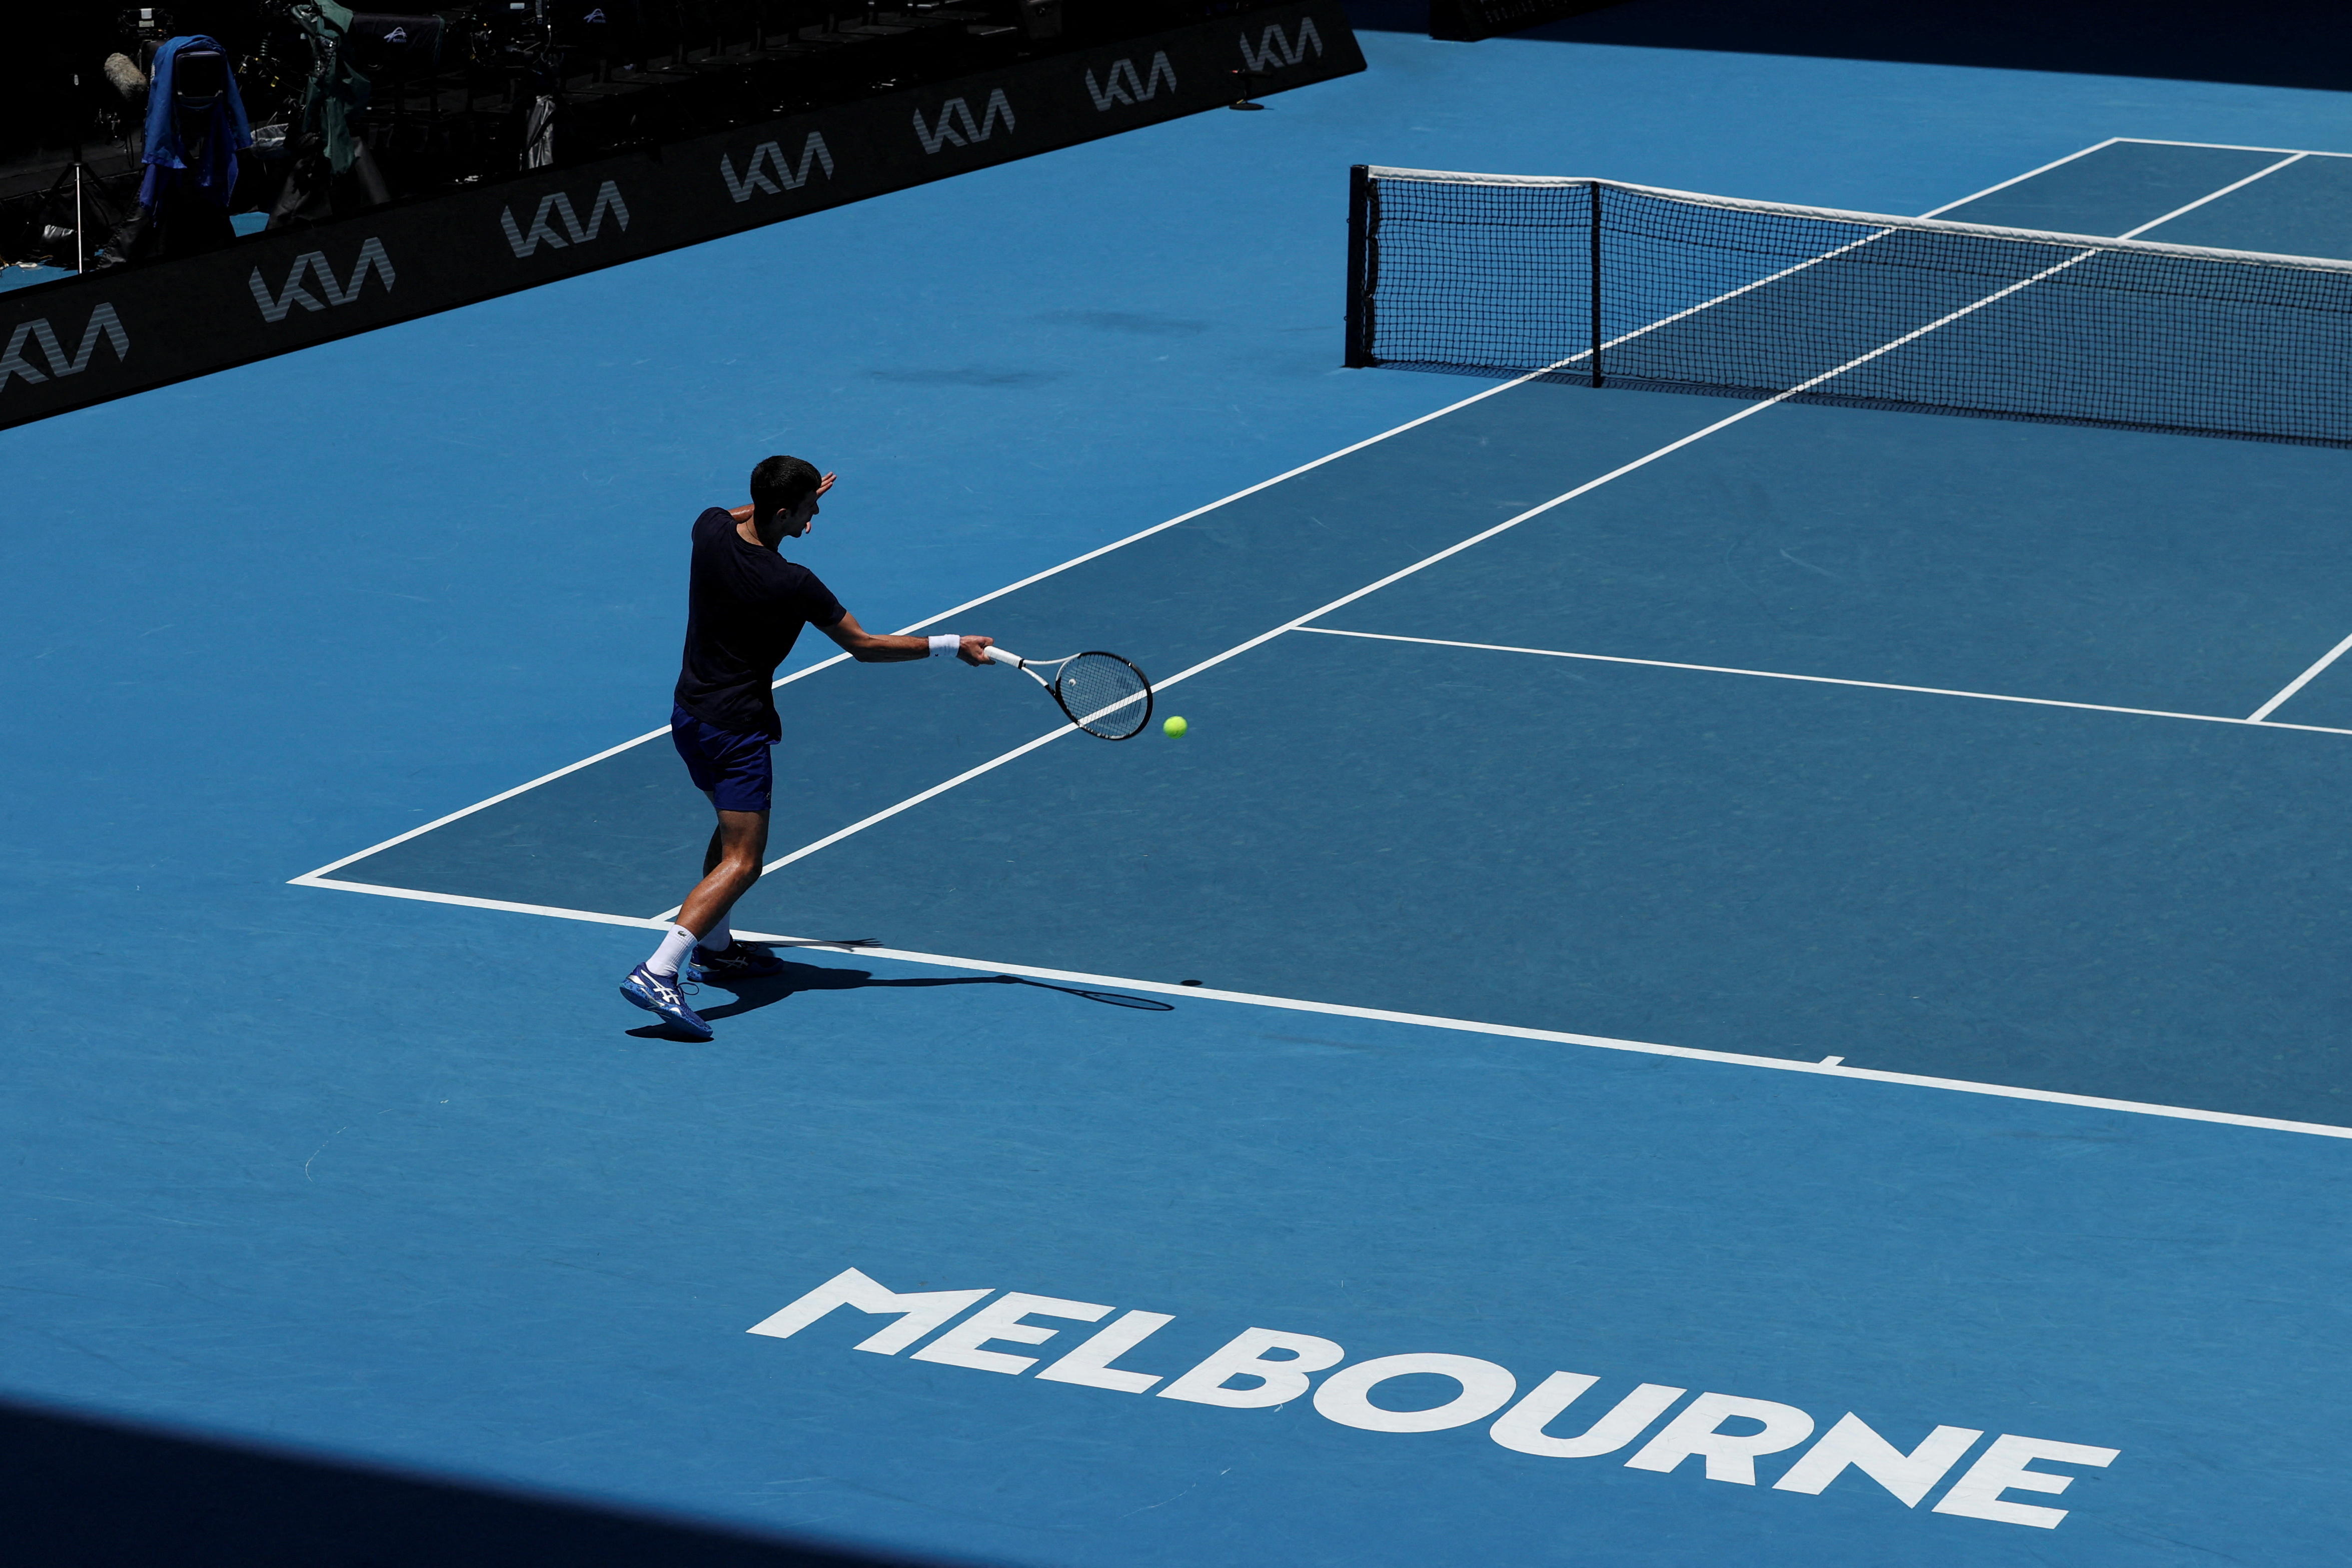 Serbian tennis player Novak Djokovic practices at Melbourne Park as questions remain over the legal battle regarding his visa to play in the Australian Open